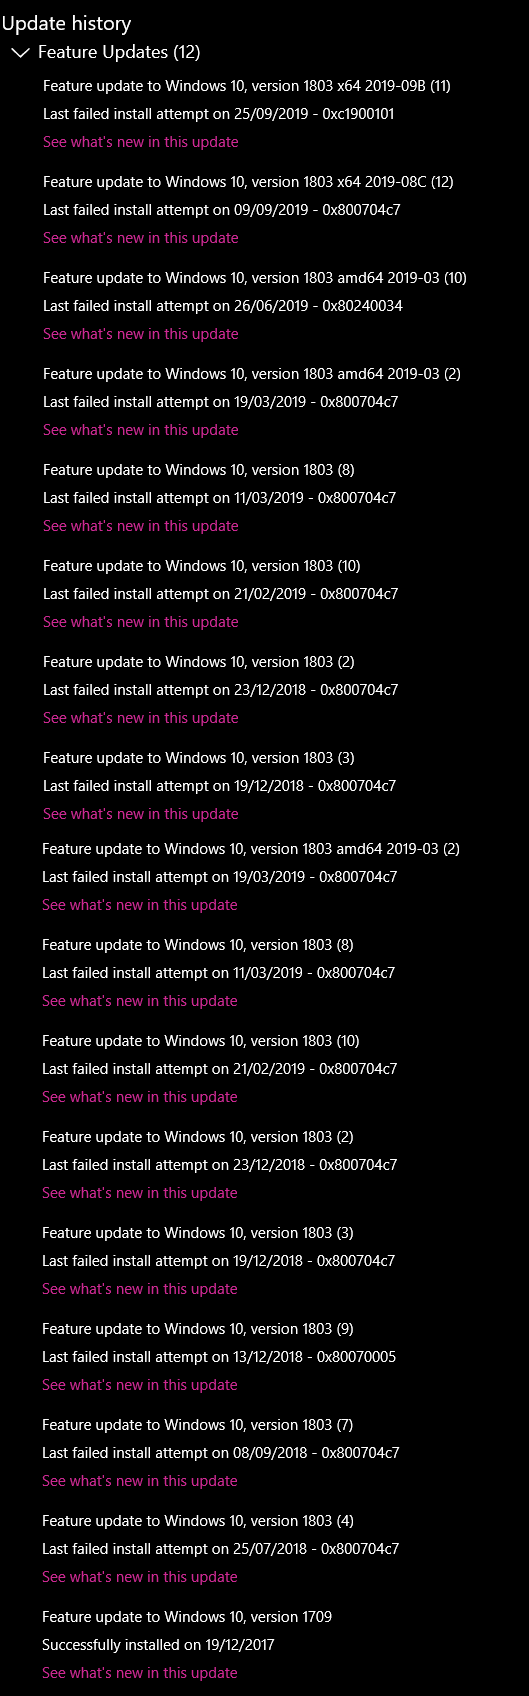 Windows Feature update has not successfully installed since 19/12/2017 3c1d36a4-279f-422c-b5ca-5ba12d626b20?upload=true.png